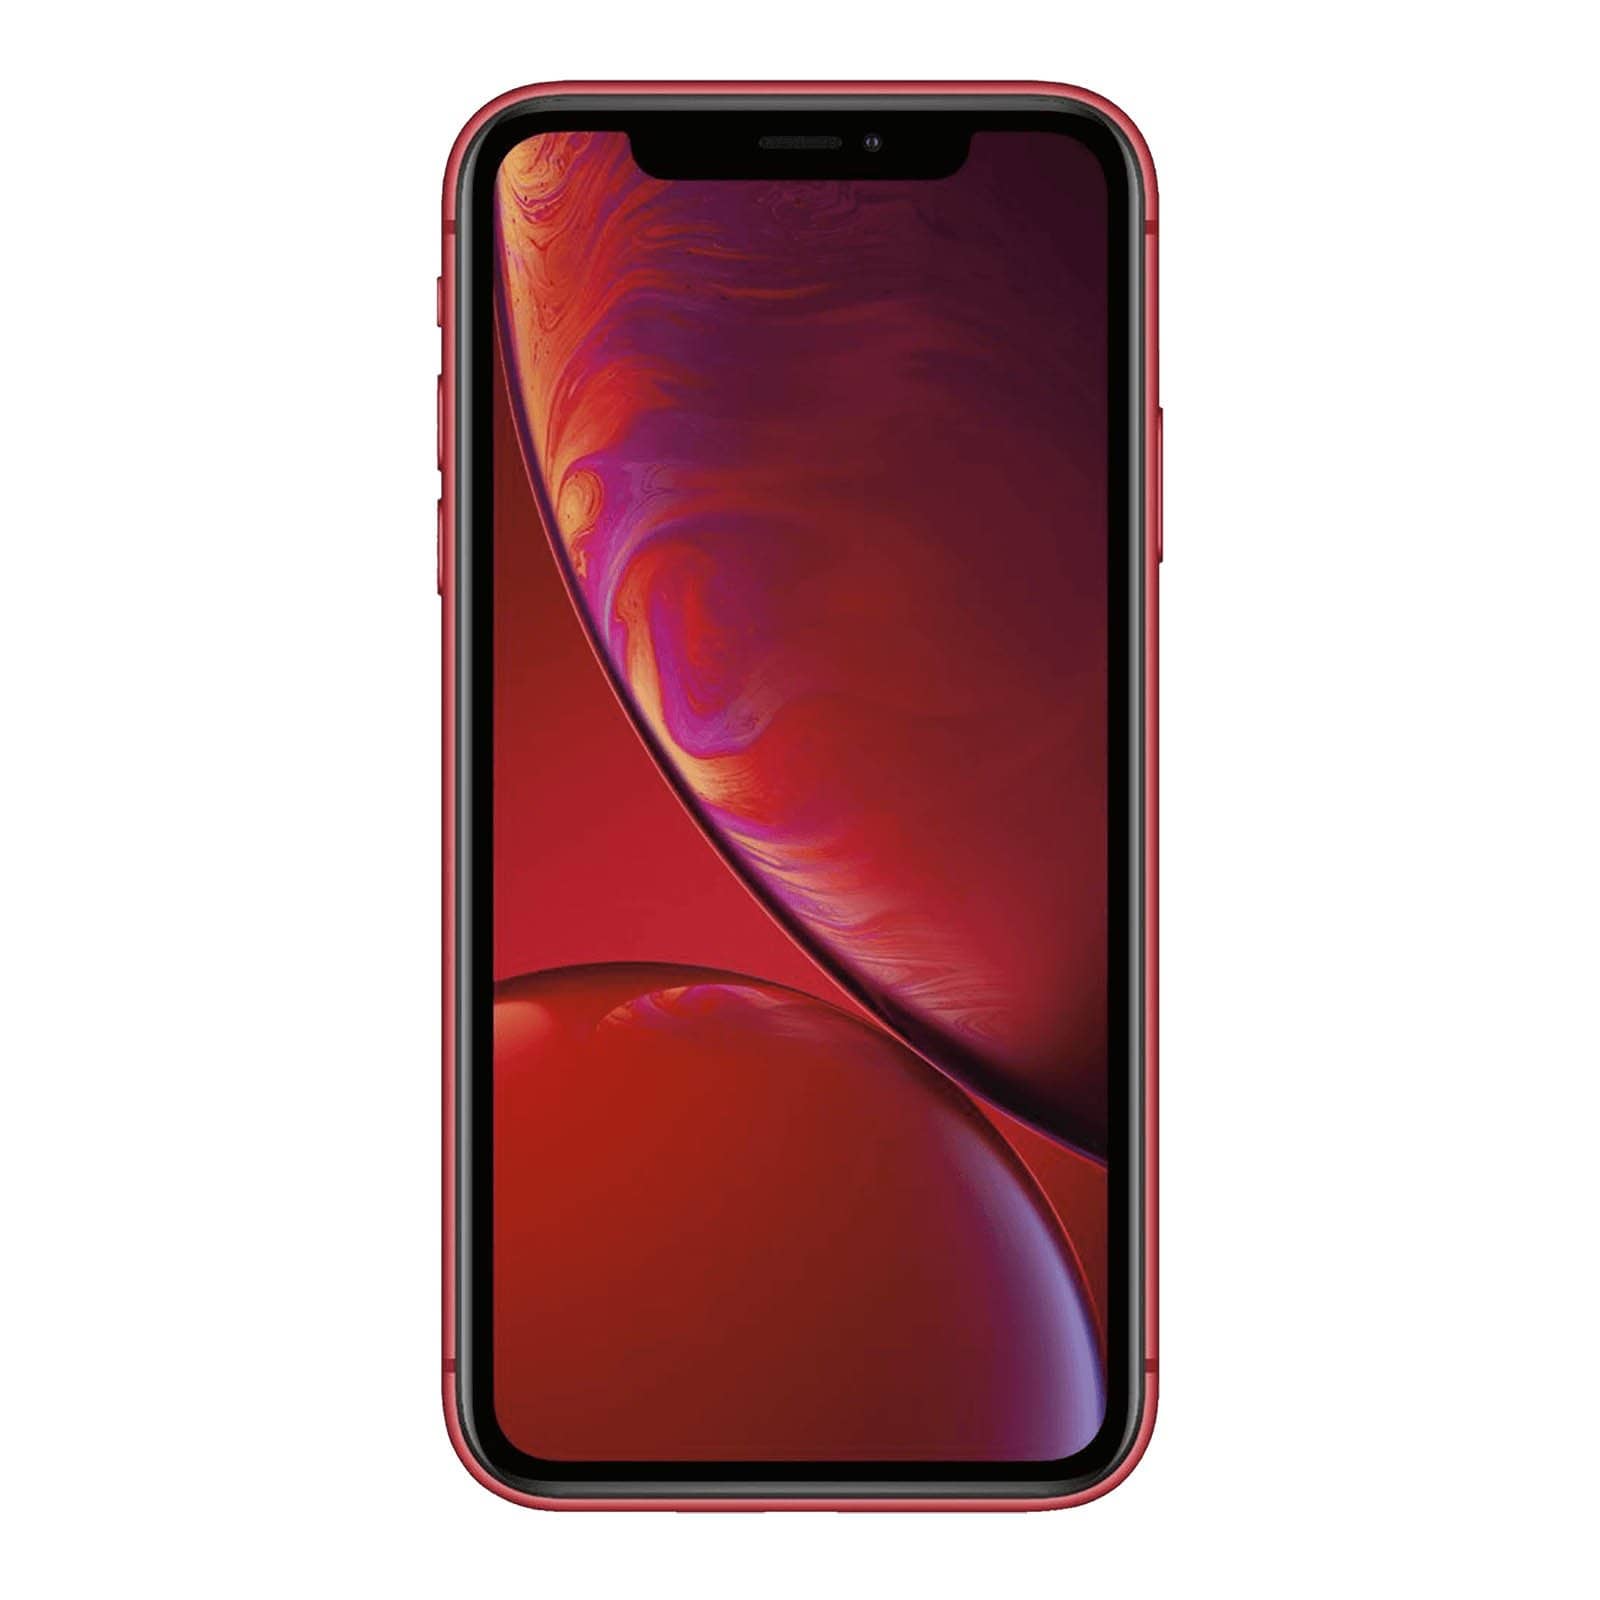 Apple iPhone XR 128GB Product Red Good - Unlocked